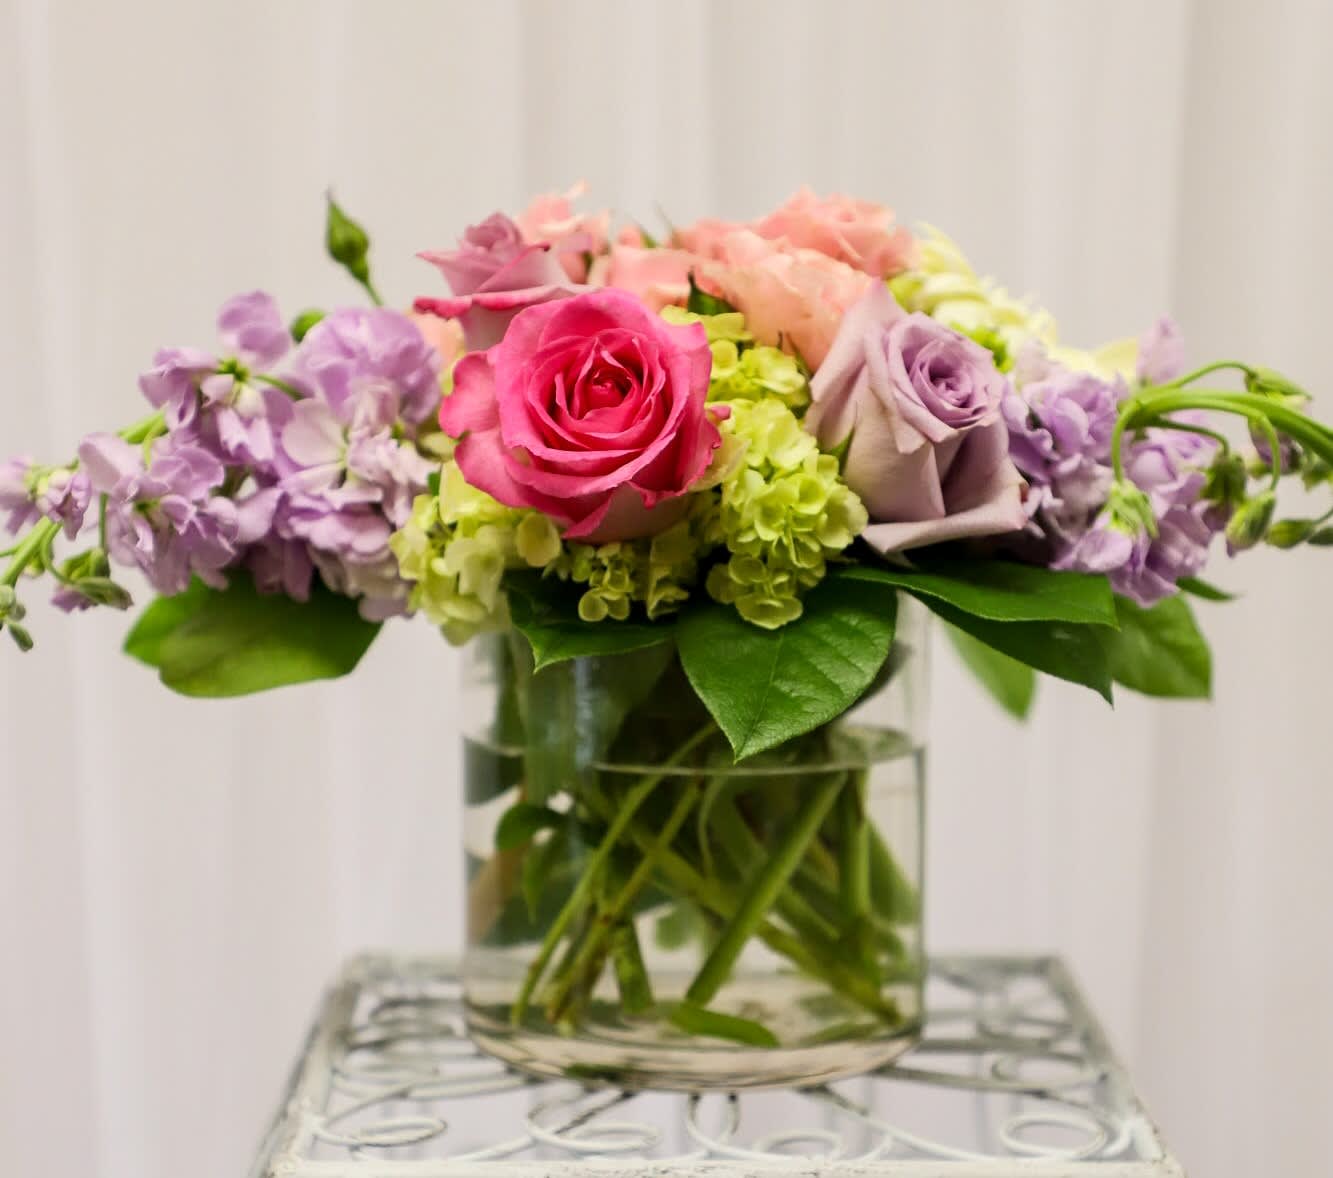 Sweet Pastels  - This low cylinder arrangements consists of all shades of pastel colors. Flowers used are hydrangea, roses, spray roses, gerbera daisy's and more! 